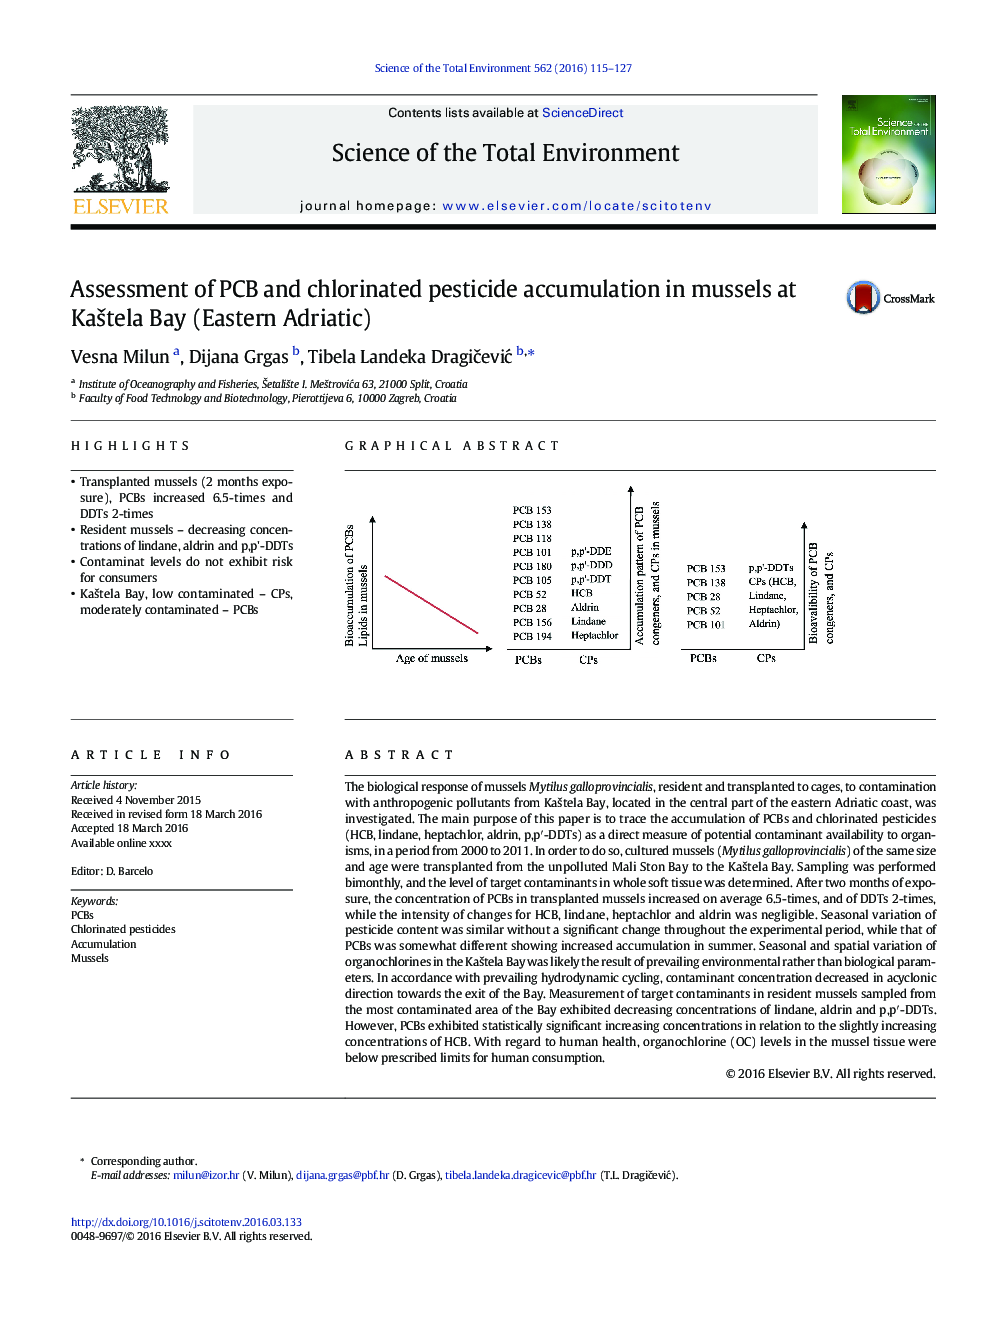 Assessment of PCB and chlorinated pesticide accumulation in mussels at KaÅ¡tela Bay (Eastern Adriatic)